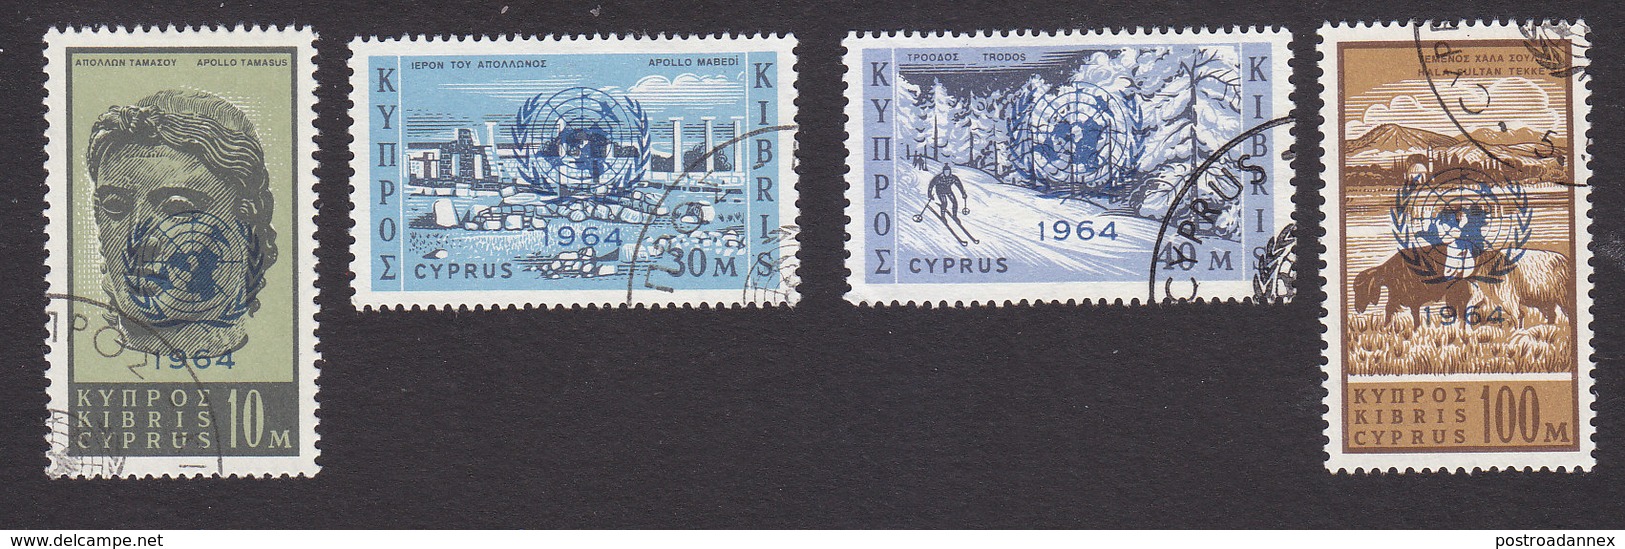 Cyprus, Scott #232-234, 236, Used, Stamps Of Cyprus With UN Overprint, Issued 1964 - Gebraucht